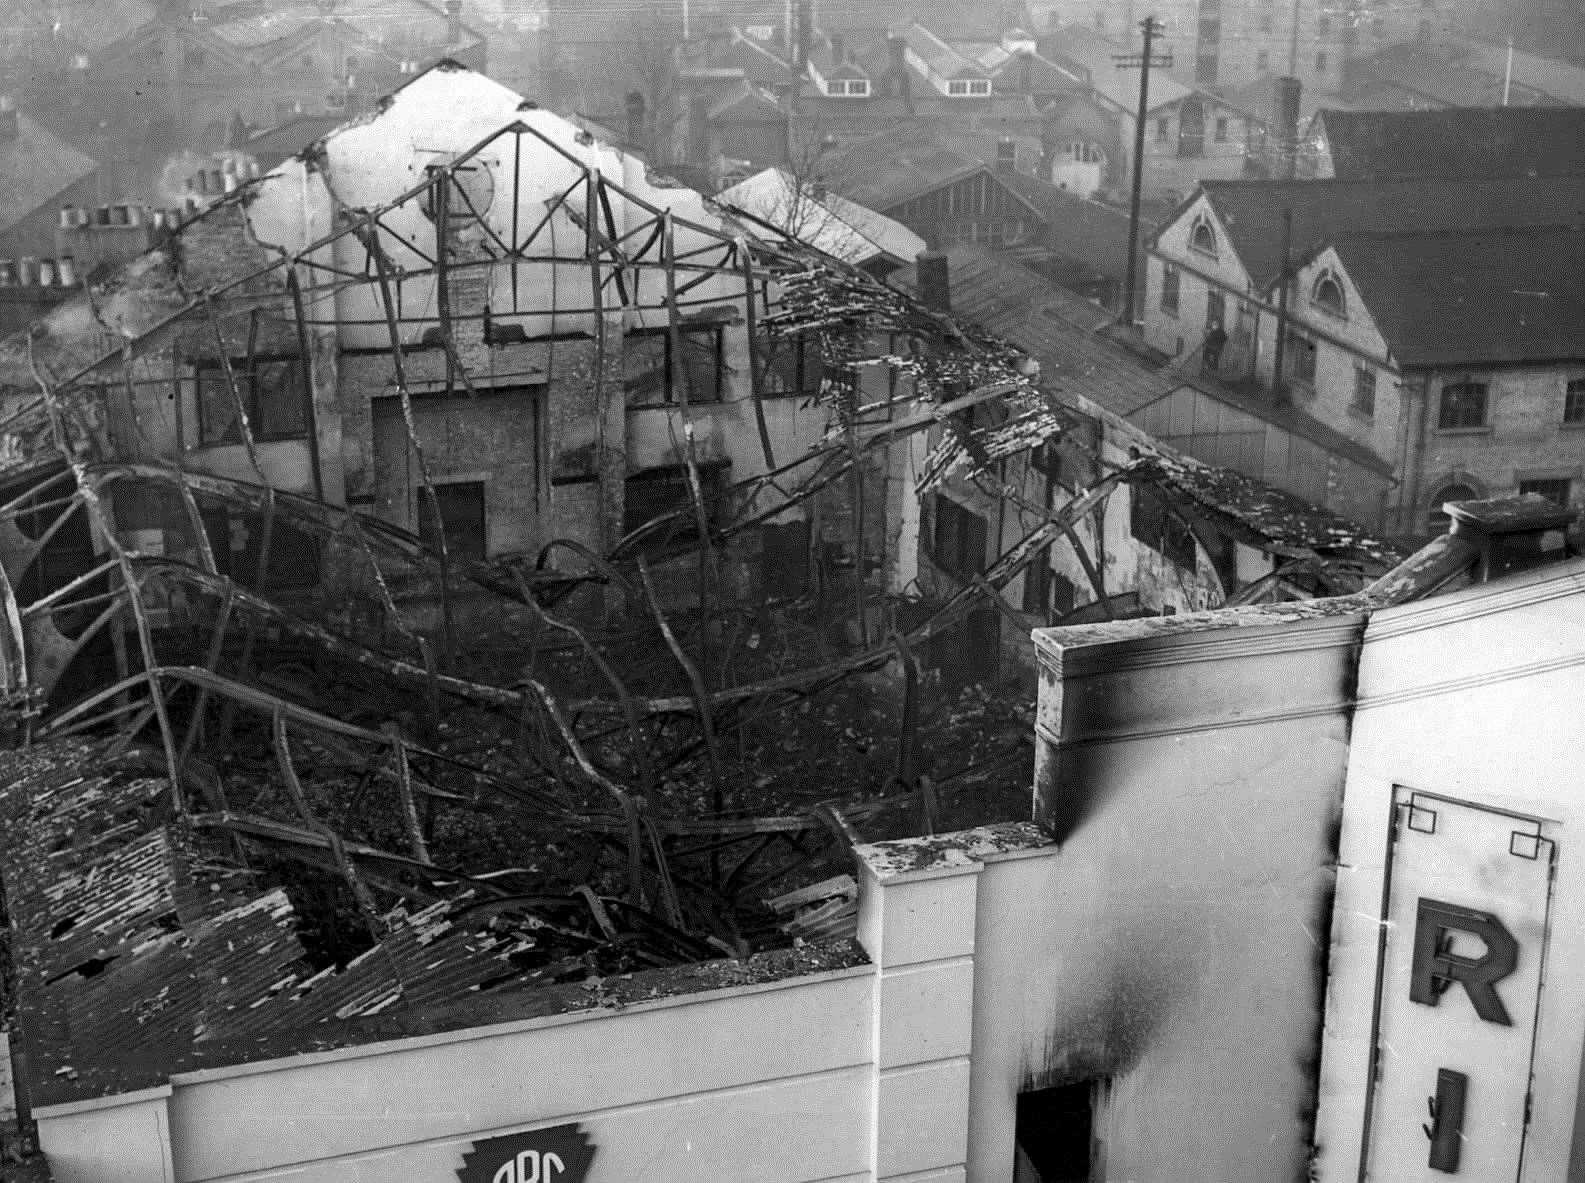 The aftermath of the cinema blaze